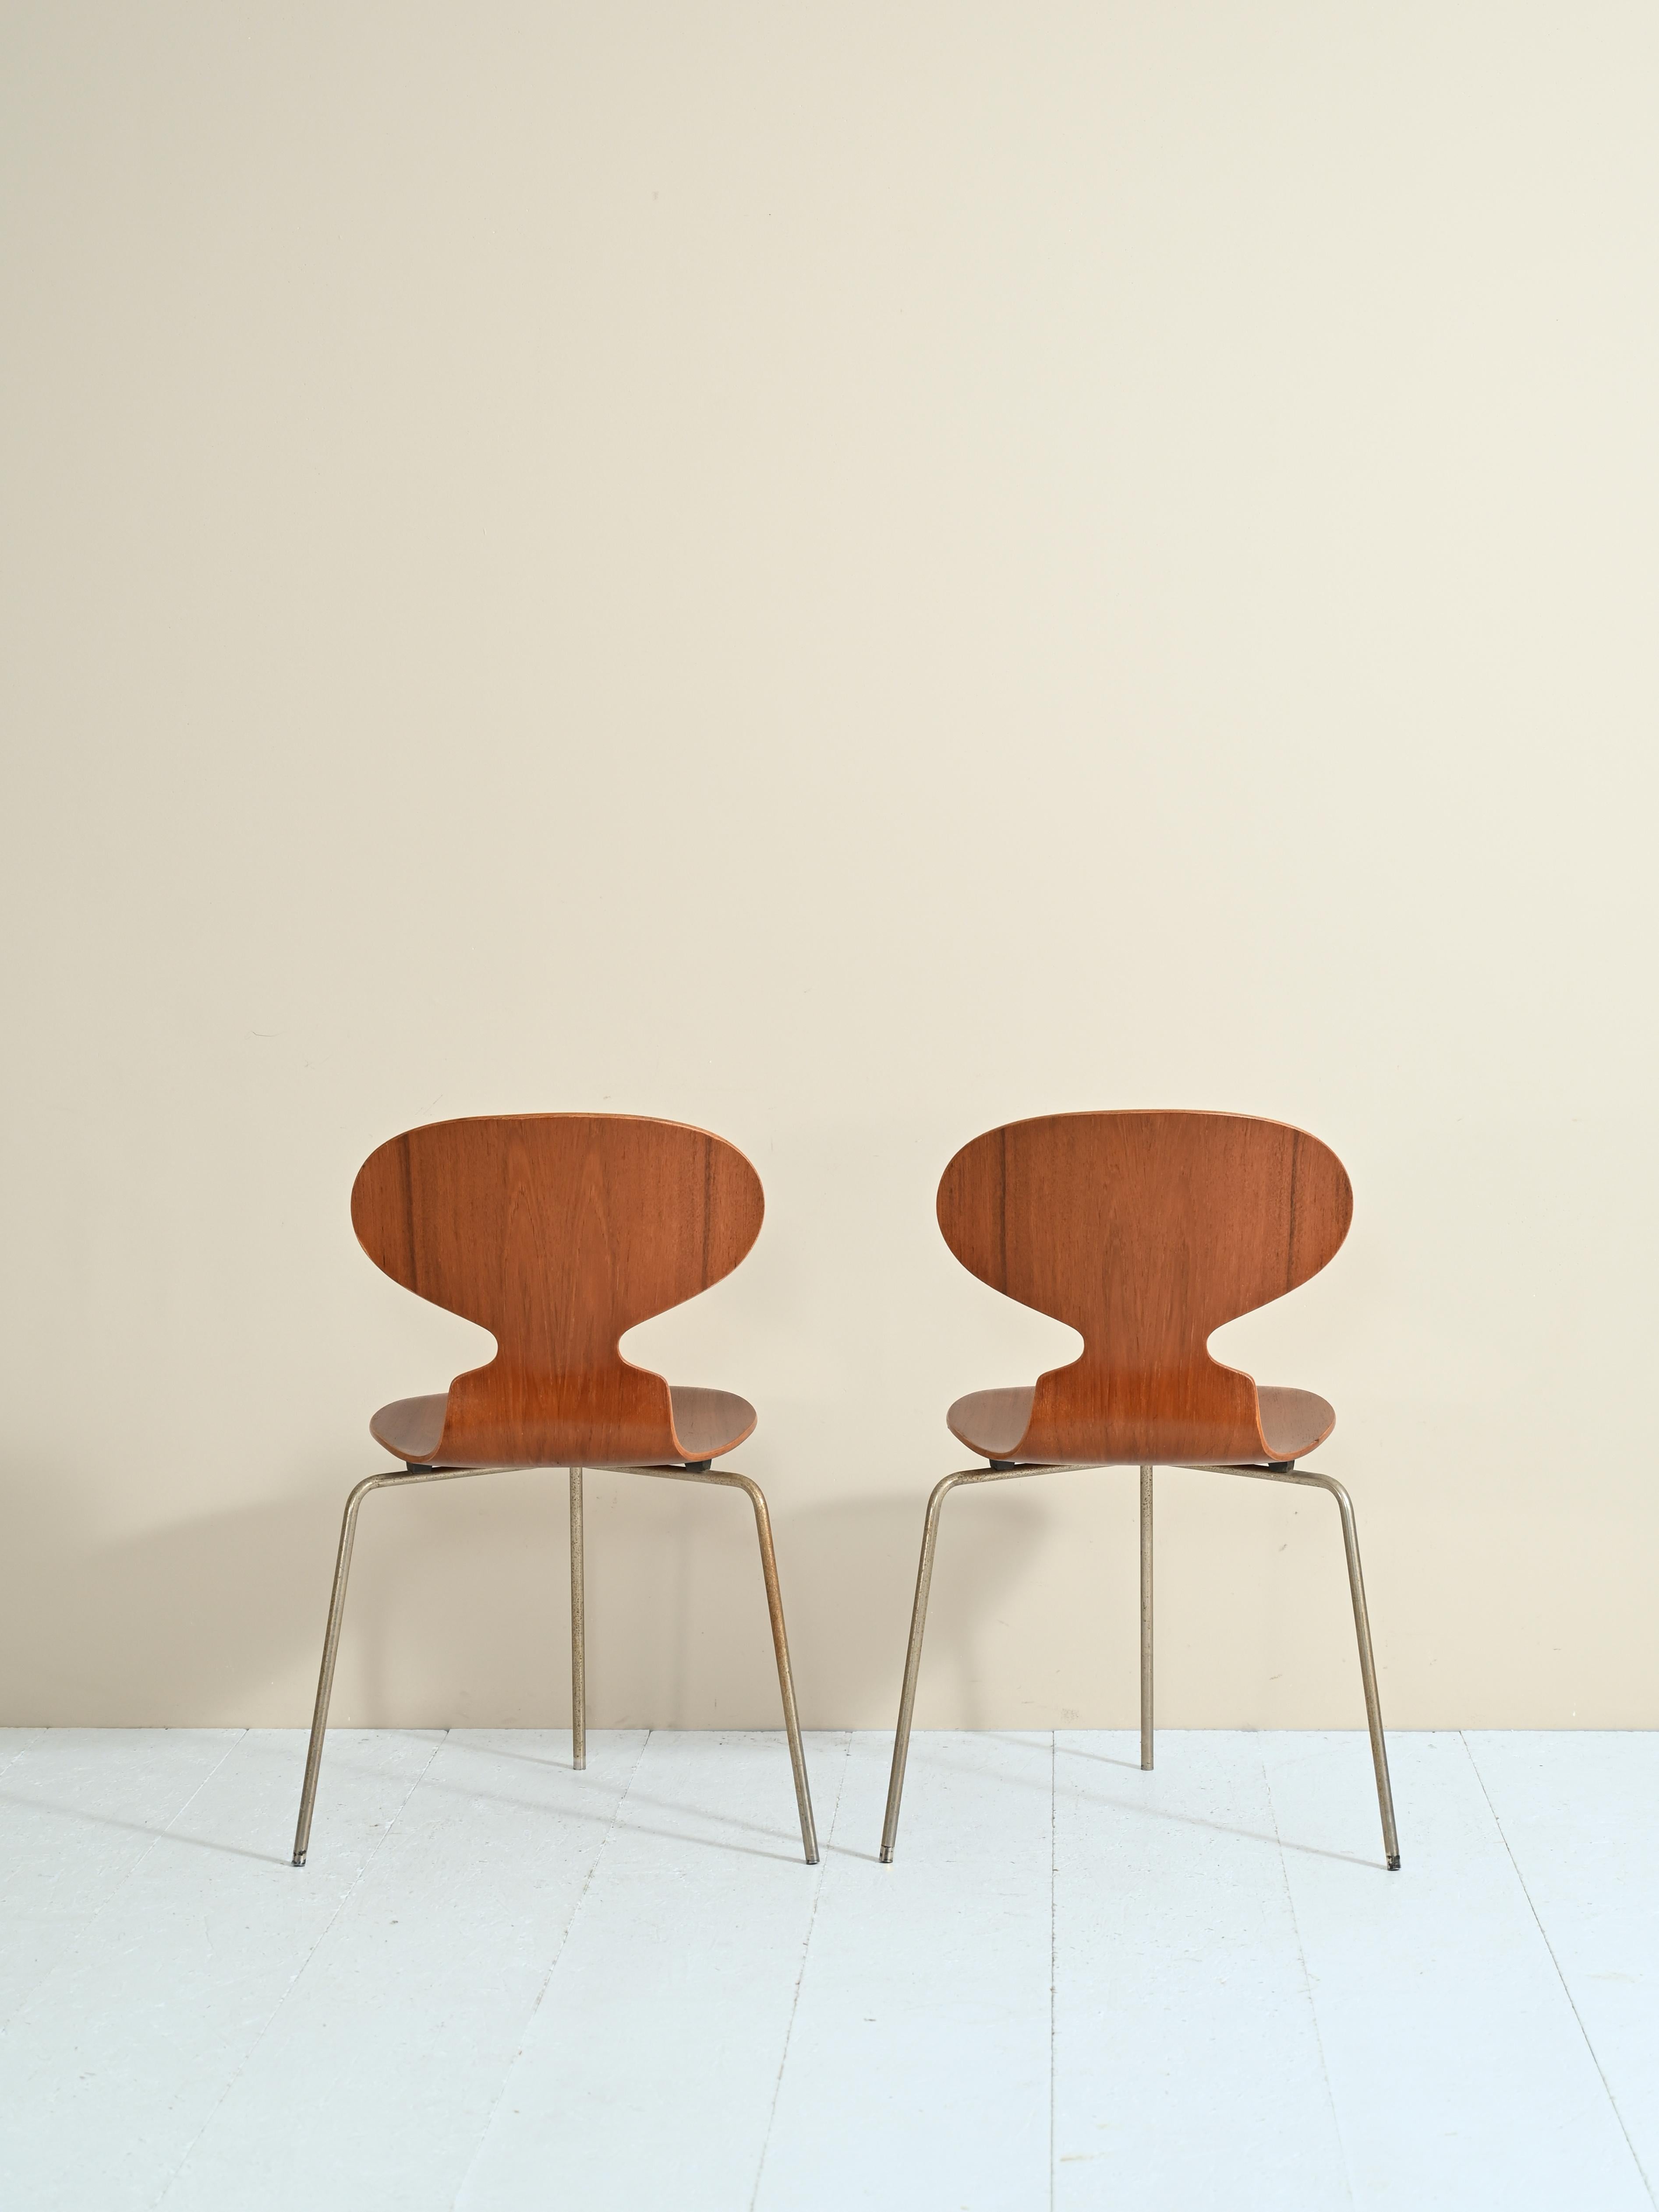 Mid-20th Century 'Ant Chair' Chairs Model 3101 by Arne Jacobsen for Fritz Hansen